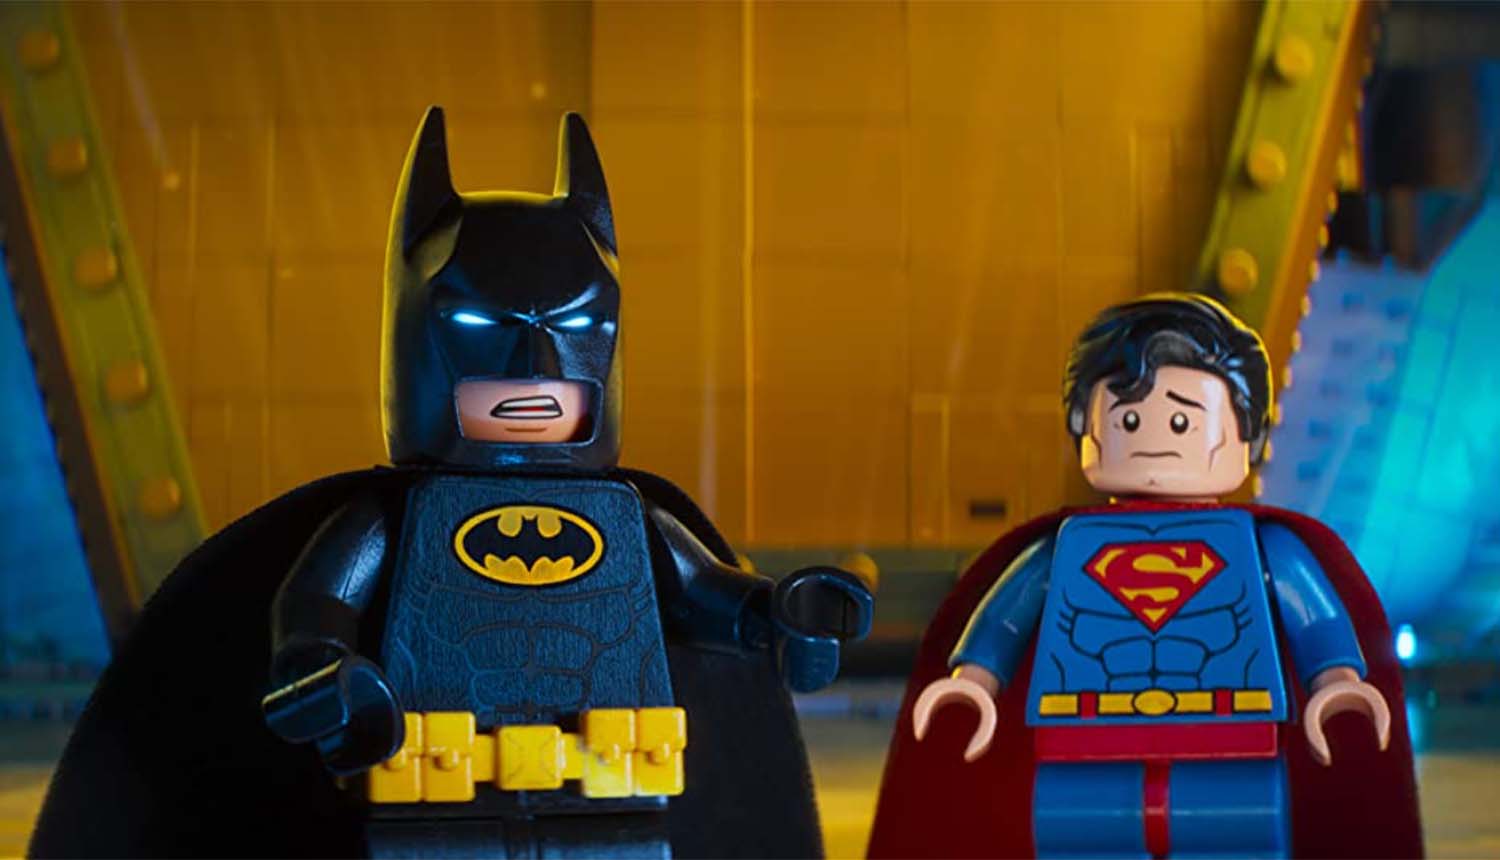 The Fate of the Furious, The LEGO Batman Movie & more new movie